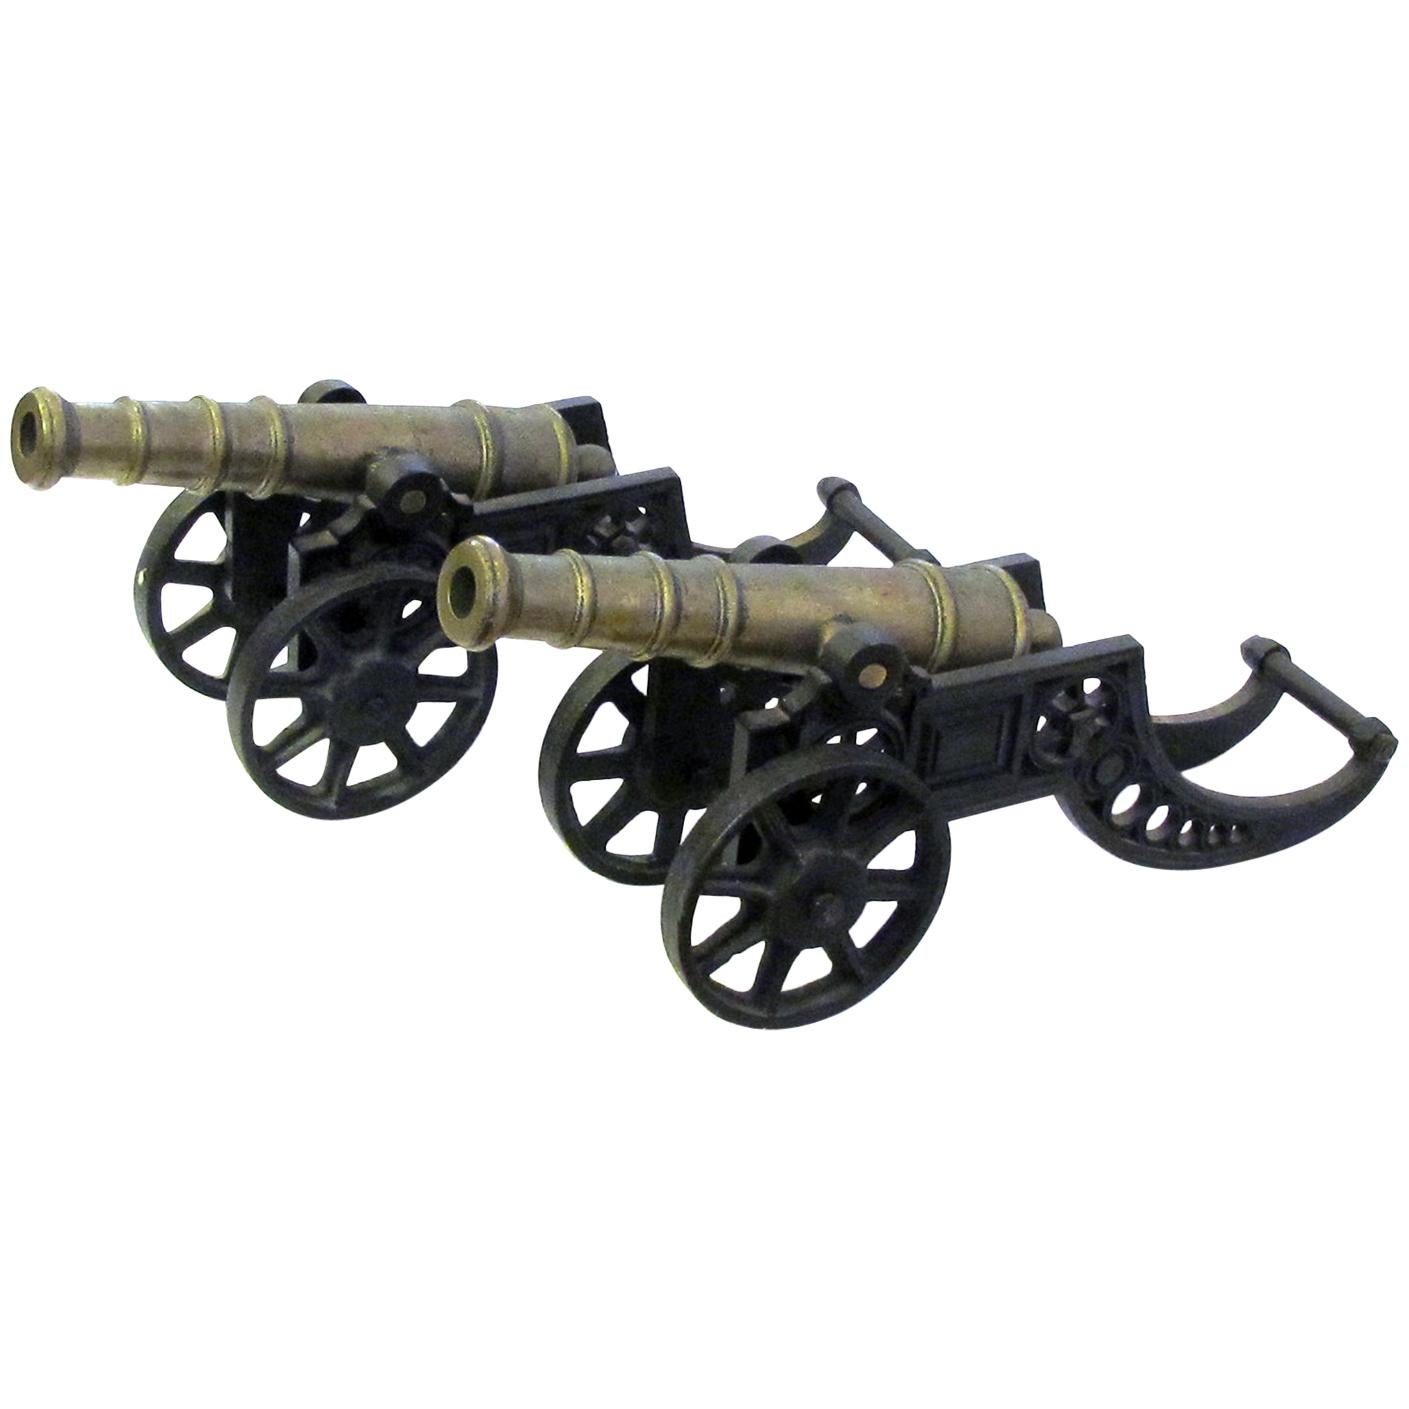 Pair of English Brass Ornamental Signal Cannons on Cast Iron Carriages